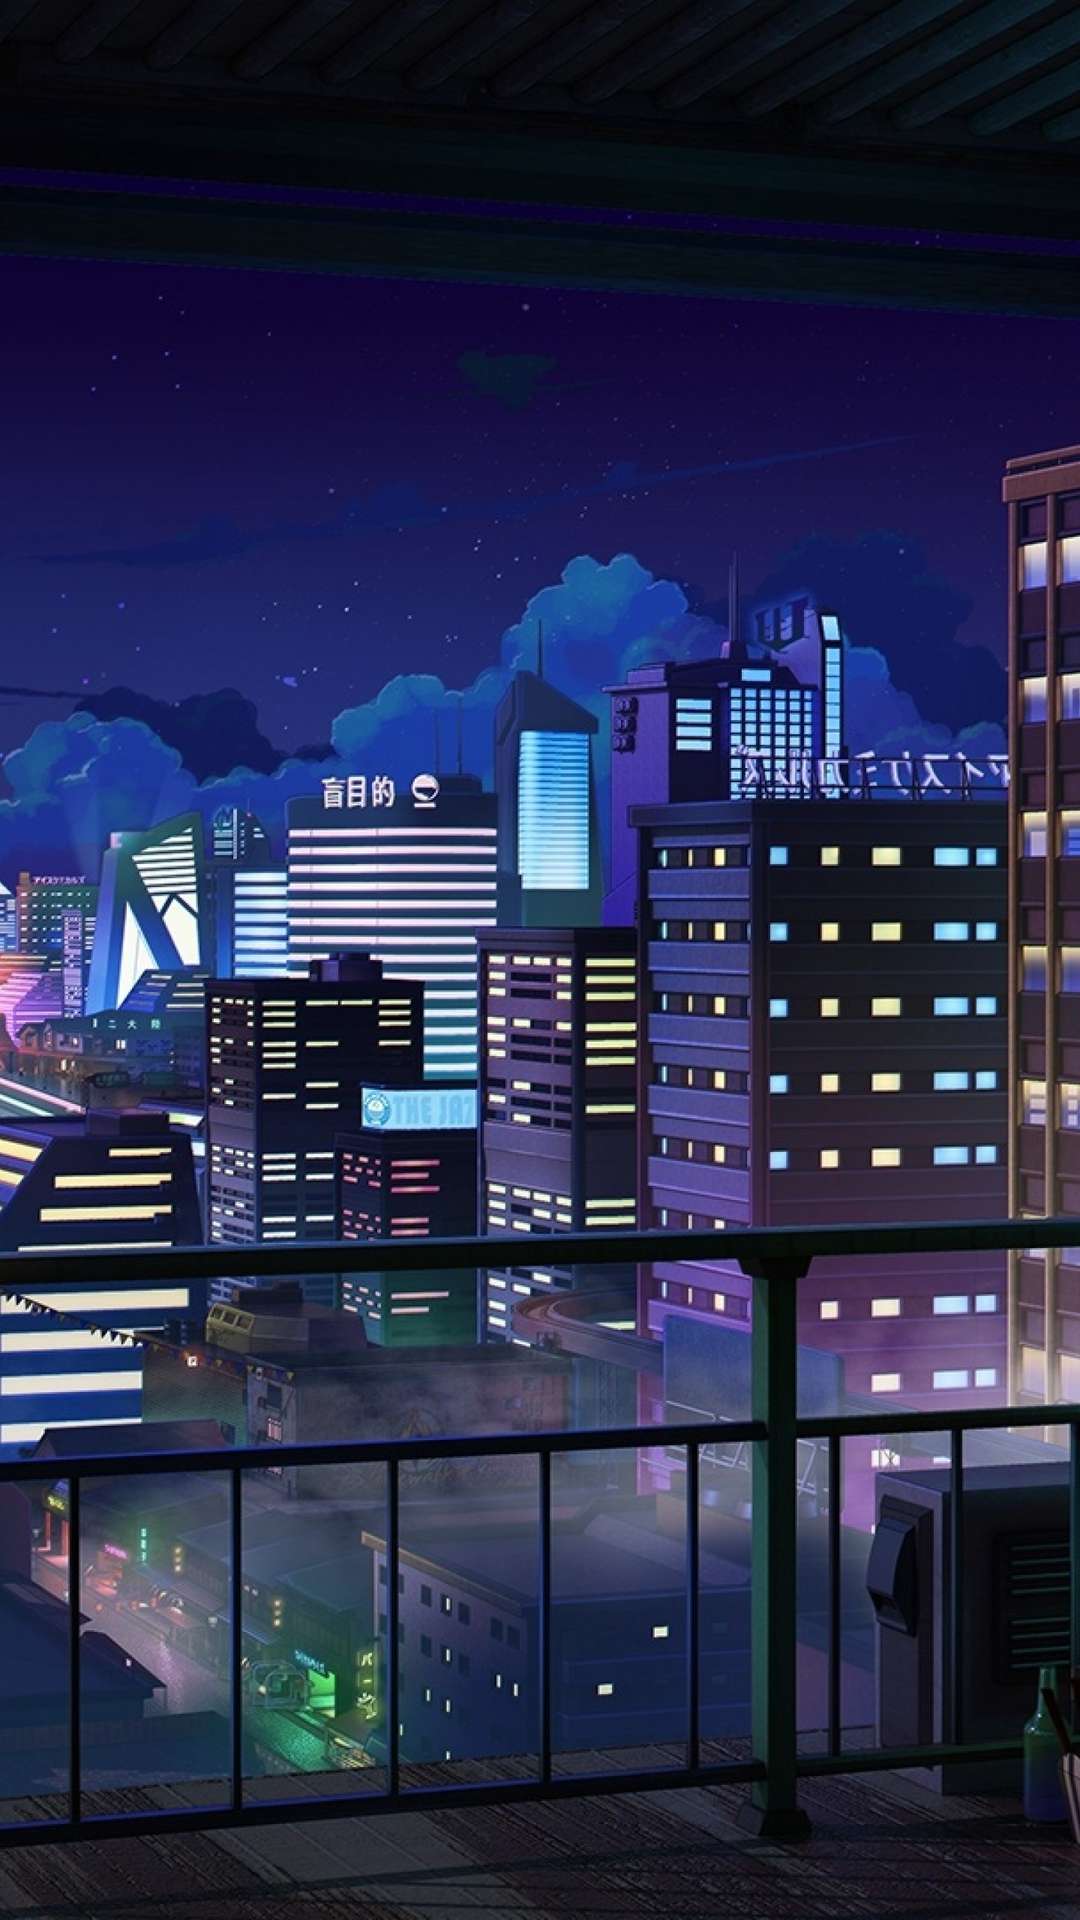 290+ Anime City HD Wallpapers and Backgrounds